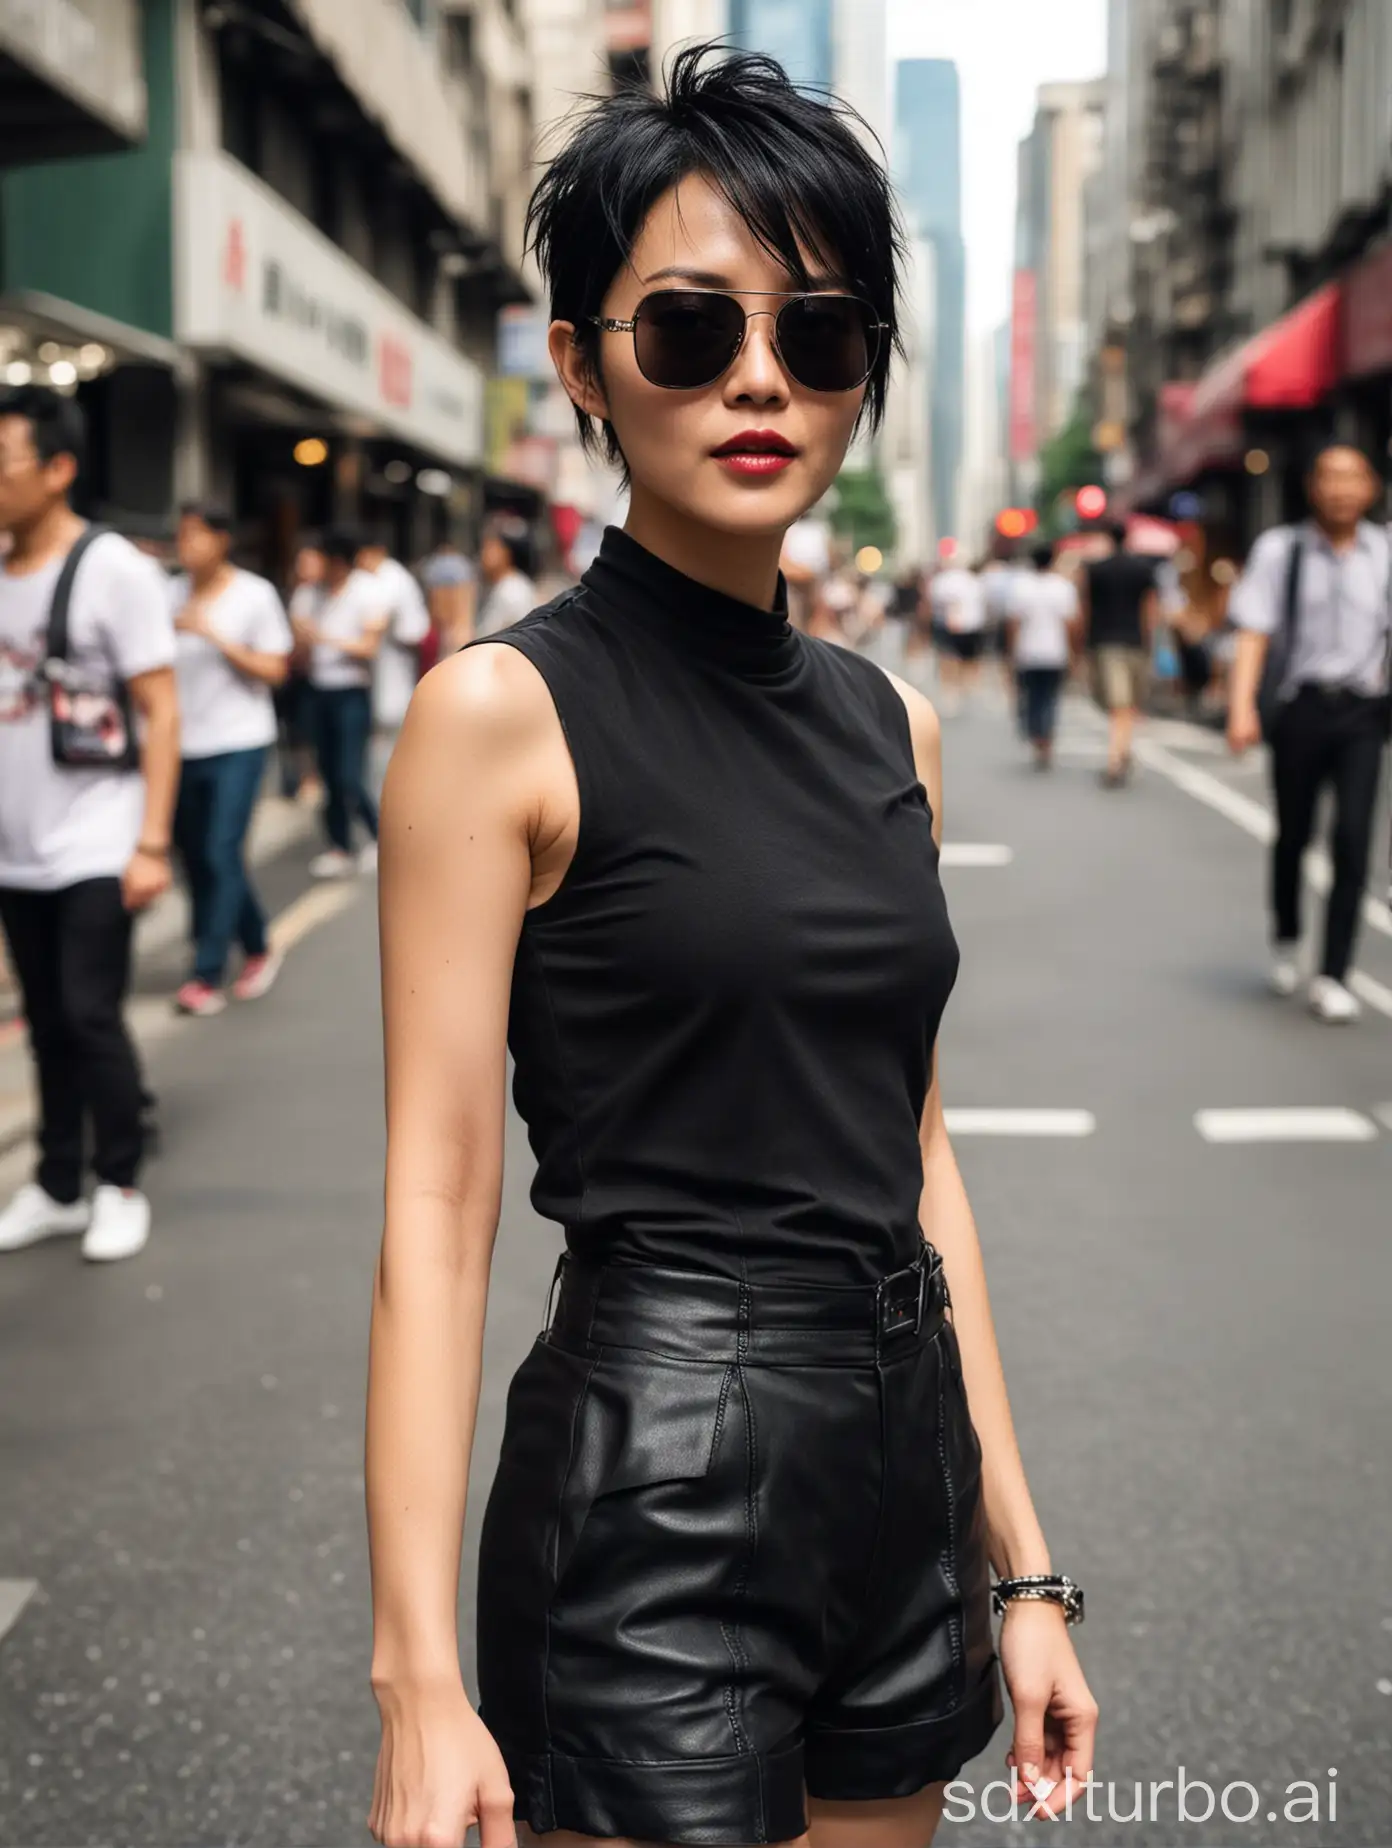 Faye-Wong-in-MatrixInspired-Outfit-on-Busy-City-Sidewalk